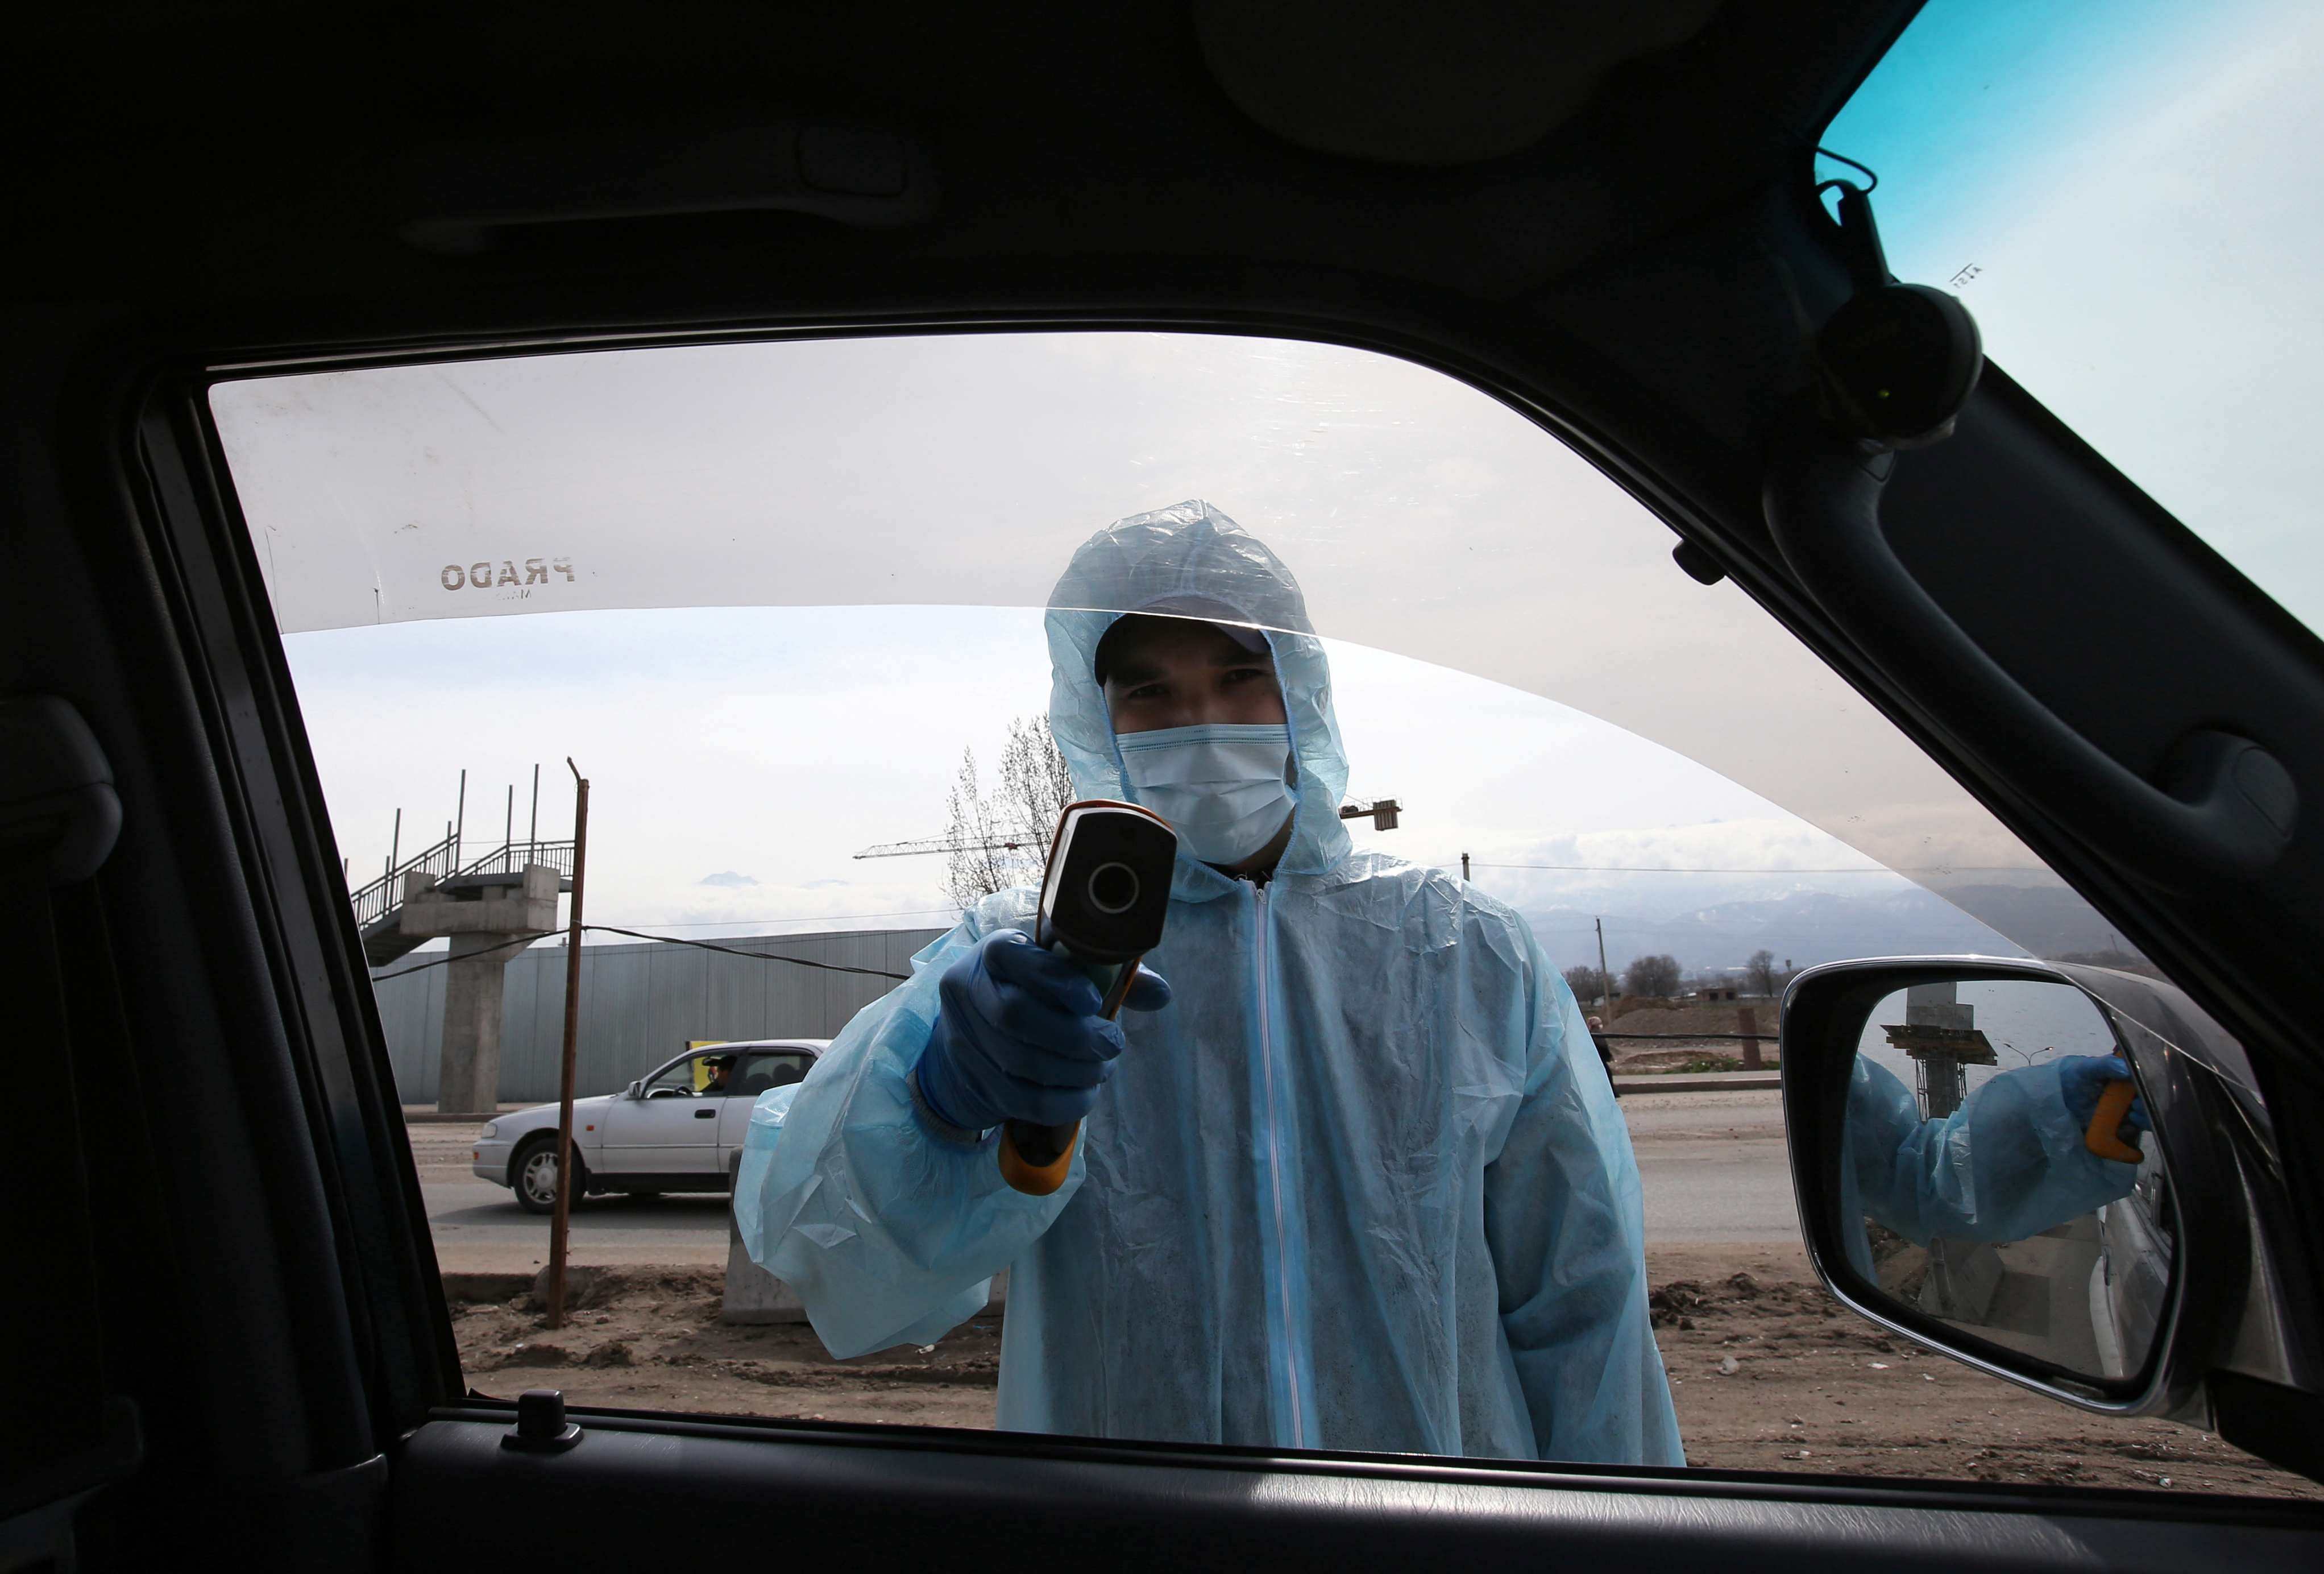 A medical official wearing protective gear takes the body temperature of passengers at a checkpoint set up to lock down the city to prevent the spread of coronavirus disease (COVID-19), on the outskirts of Almaty, Kazakhstan. (Credit: Reuters)